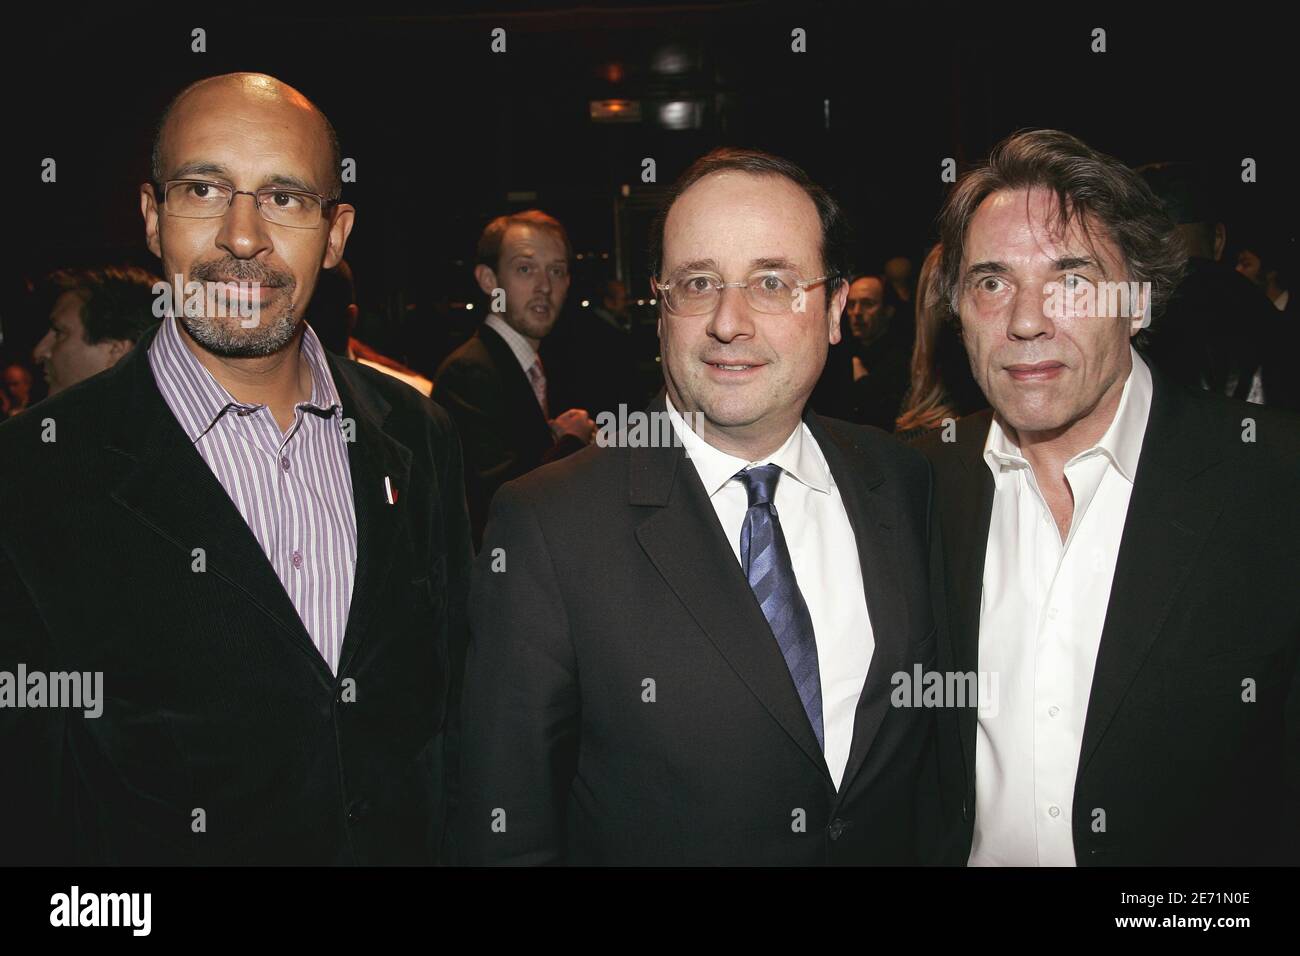 Harlem Desir, Francois Hollande and Yves Simon attend the annual dinner for godmothers and godfathers of French anti-racism association 'SOS Racisme' held at the Cabaret Sauvage in Paris, France on january 29, 2007. Photo by Mousse/ABACAPRESS.COM Stock Photo